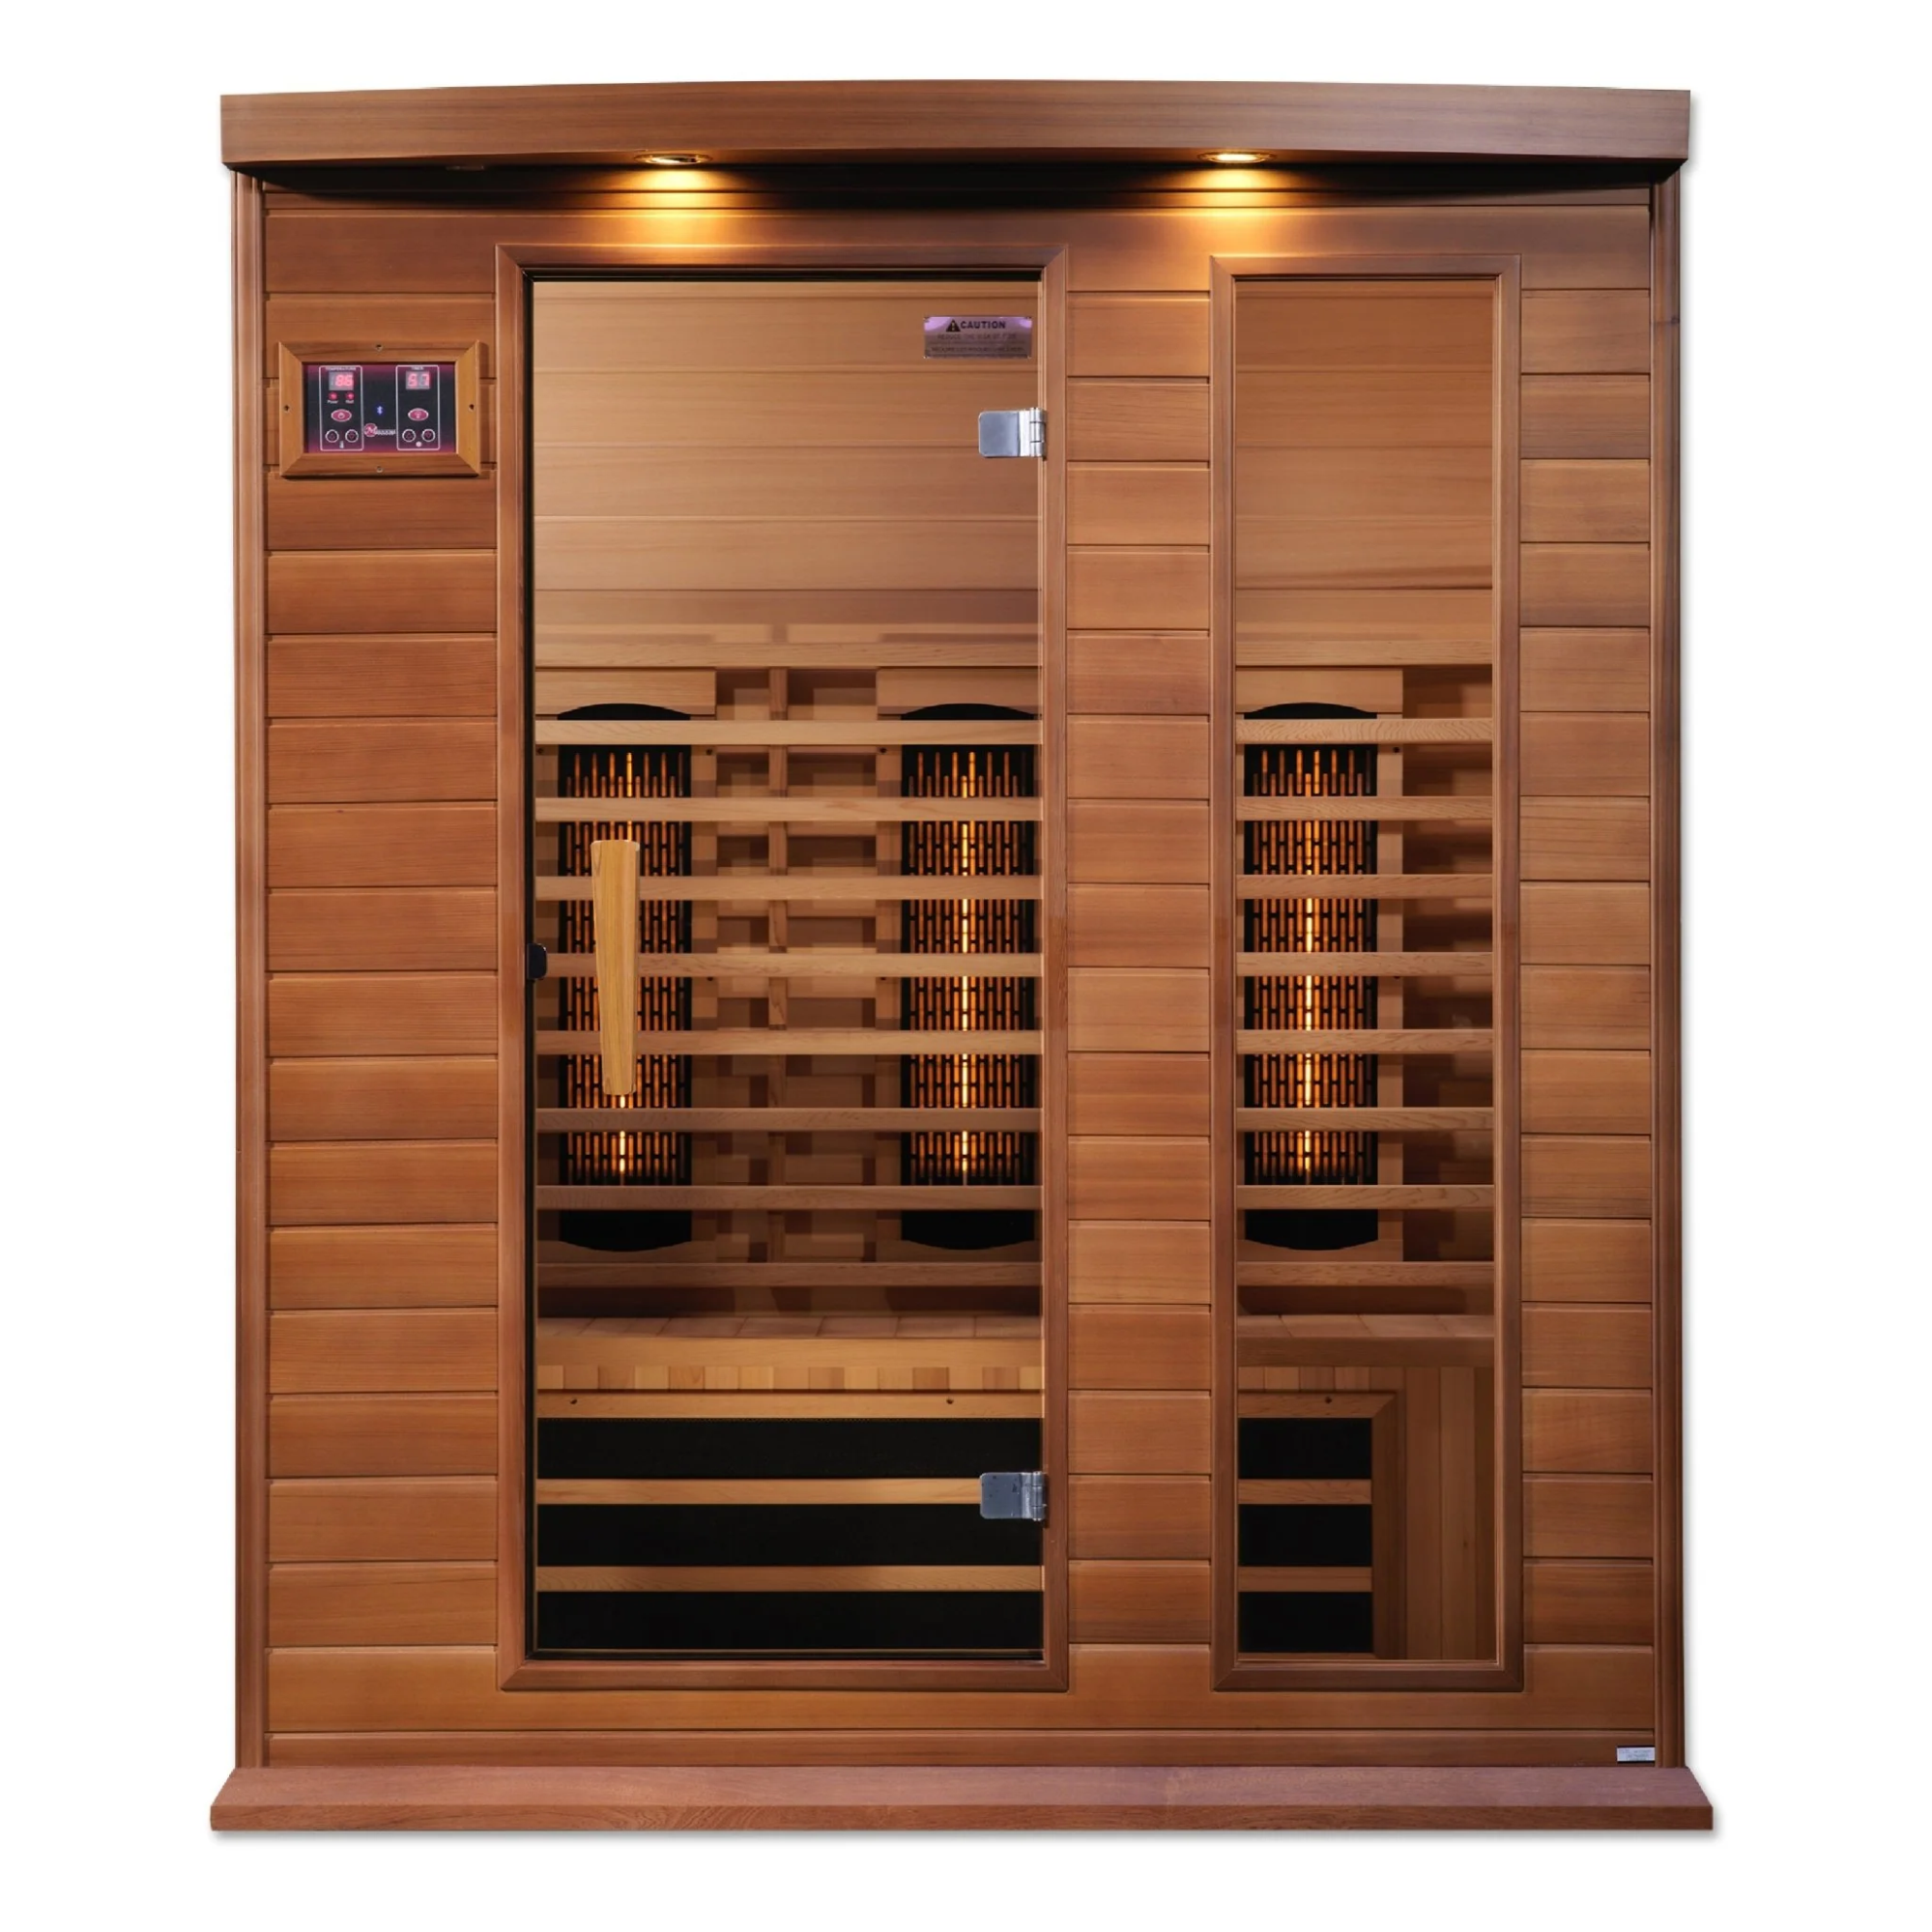 Maxxus 3-person wood infrared sauna with an LED control panel and a glass door